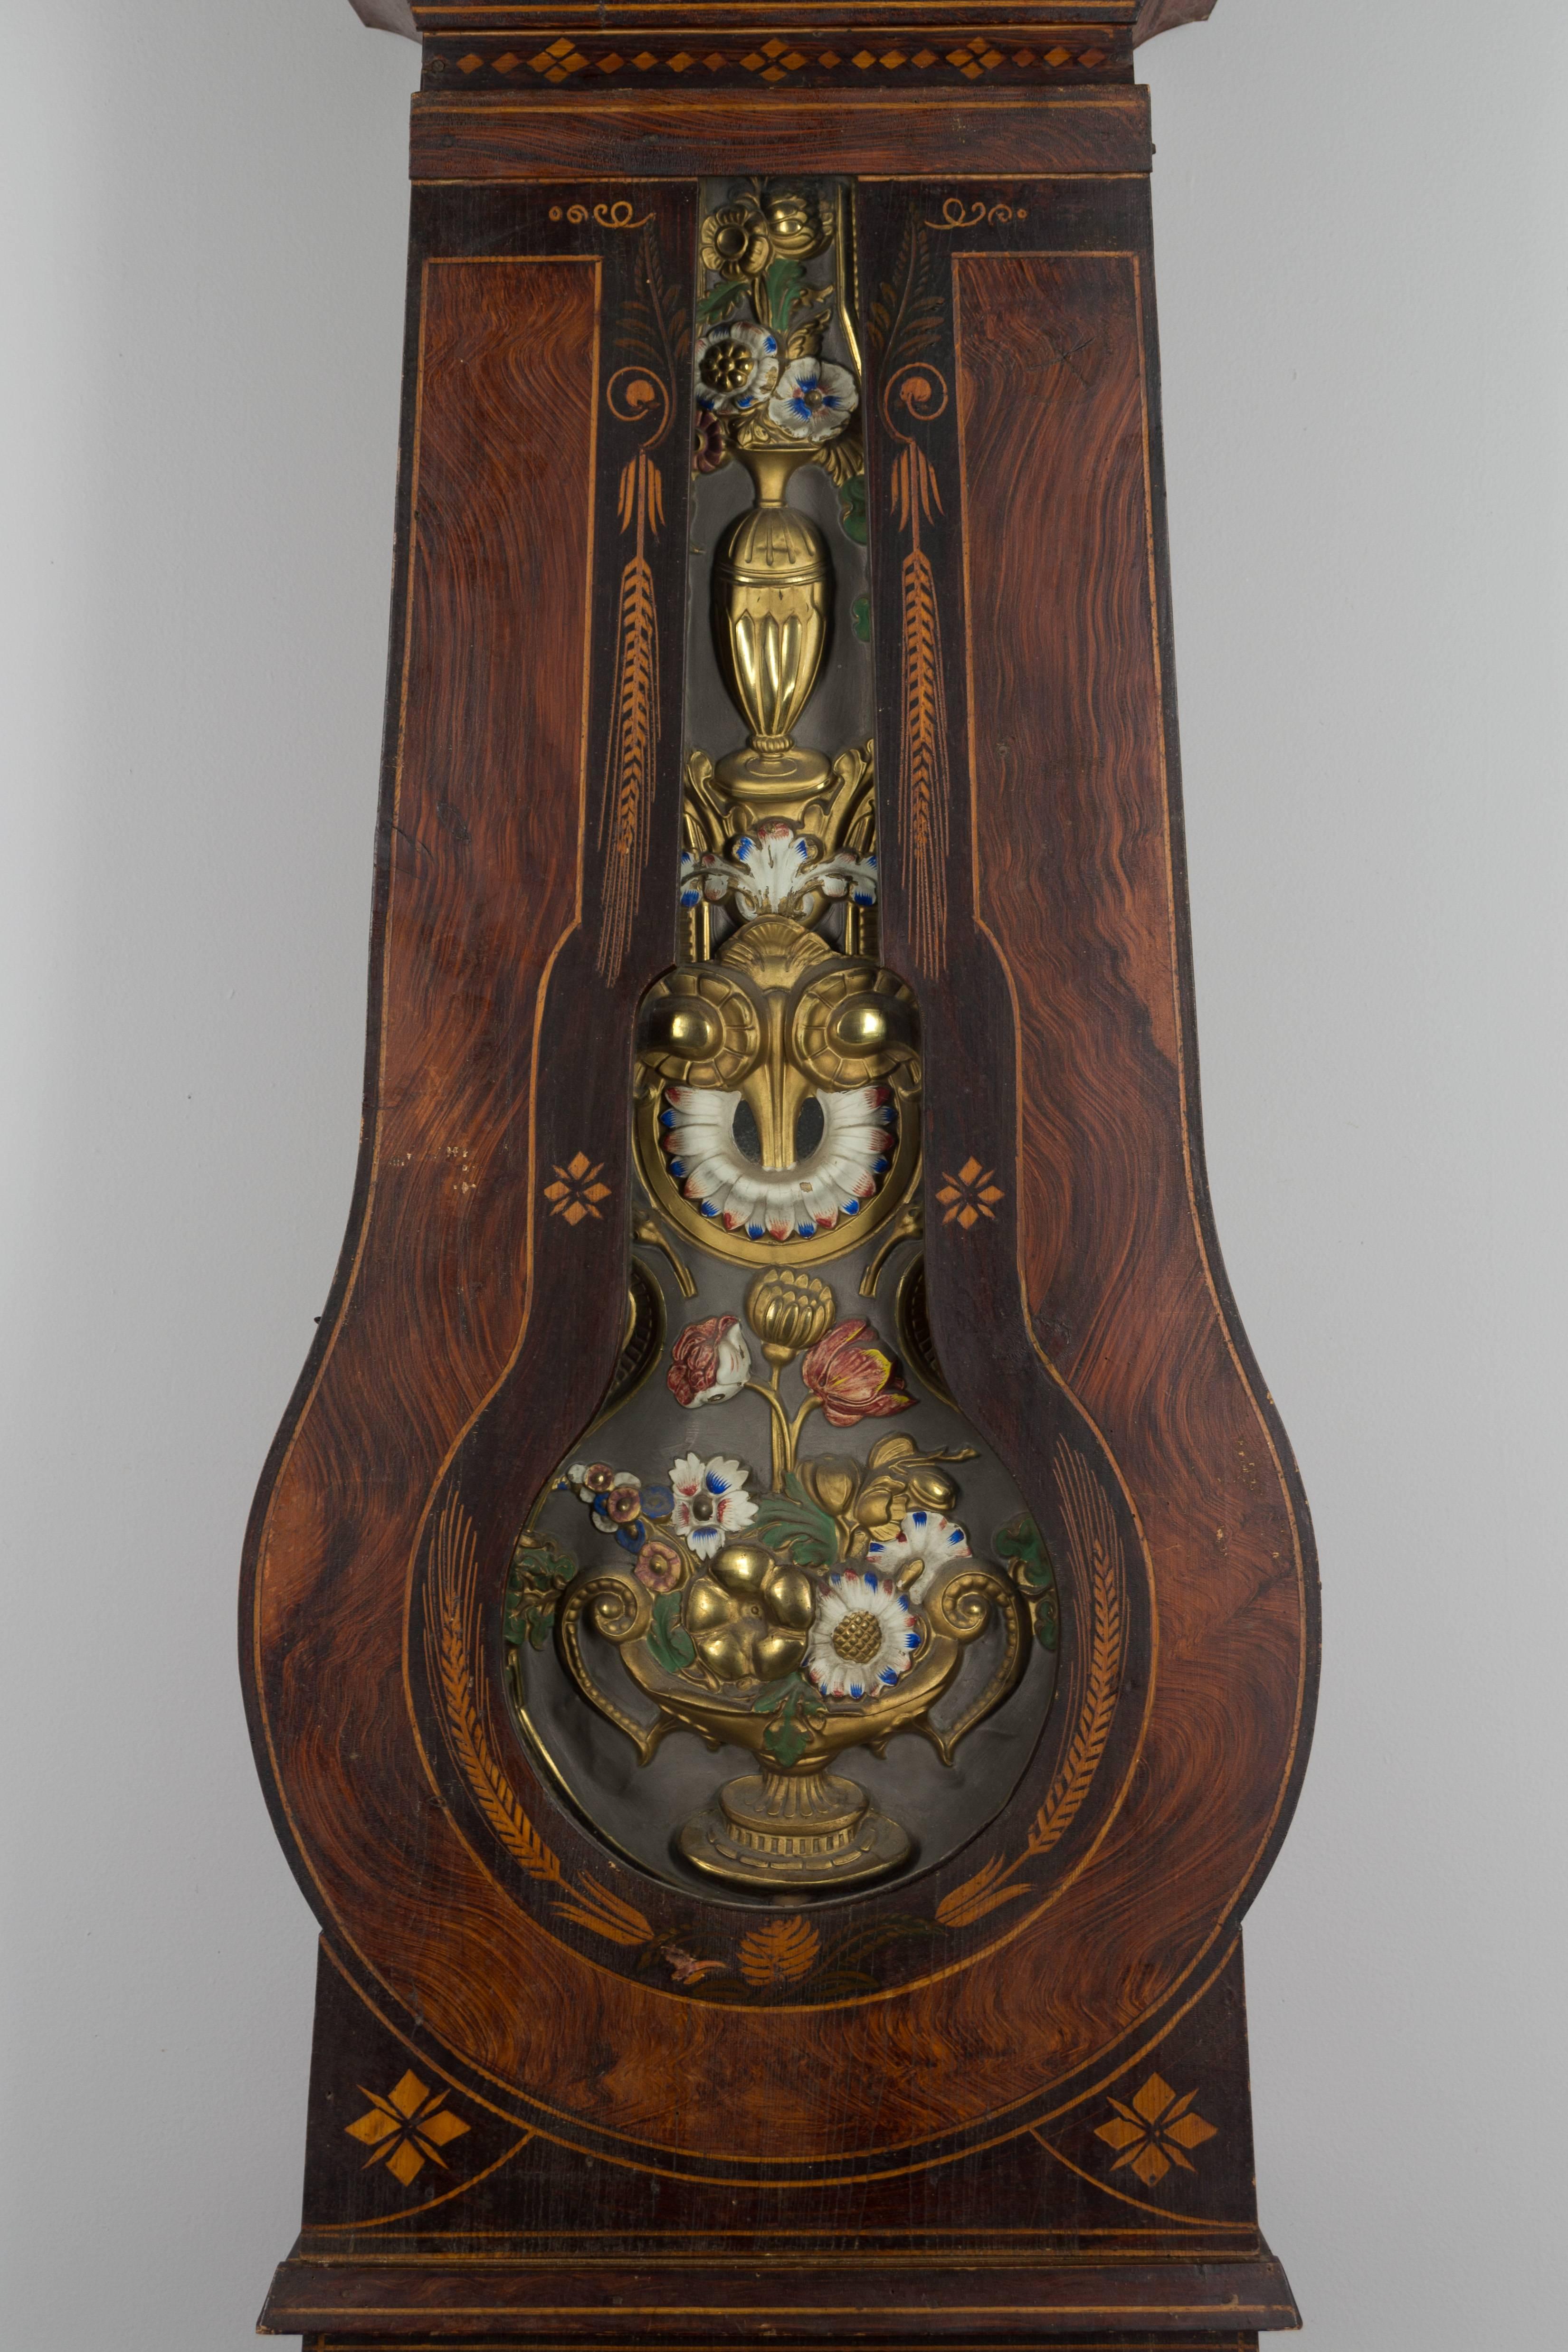 Embossed 19th Century French Comtoise or Grandfather Clock